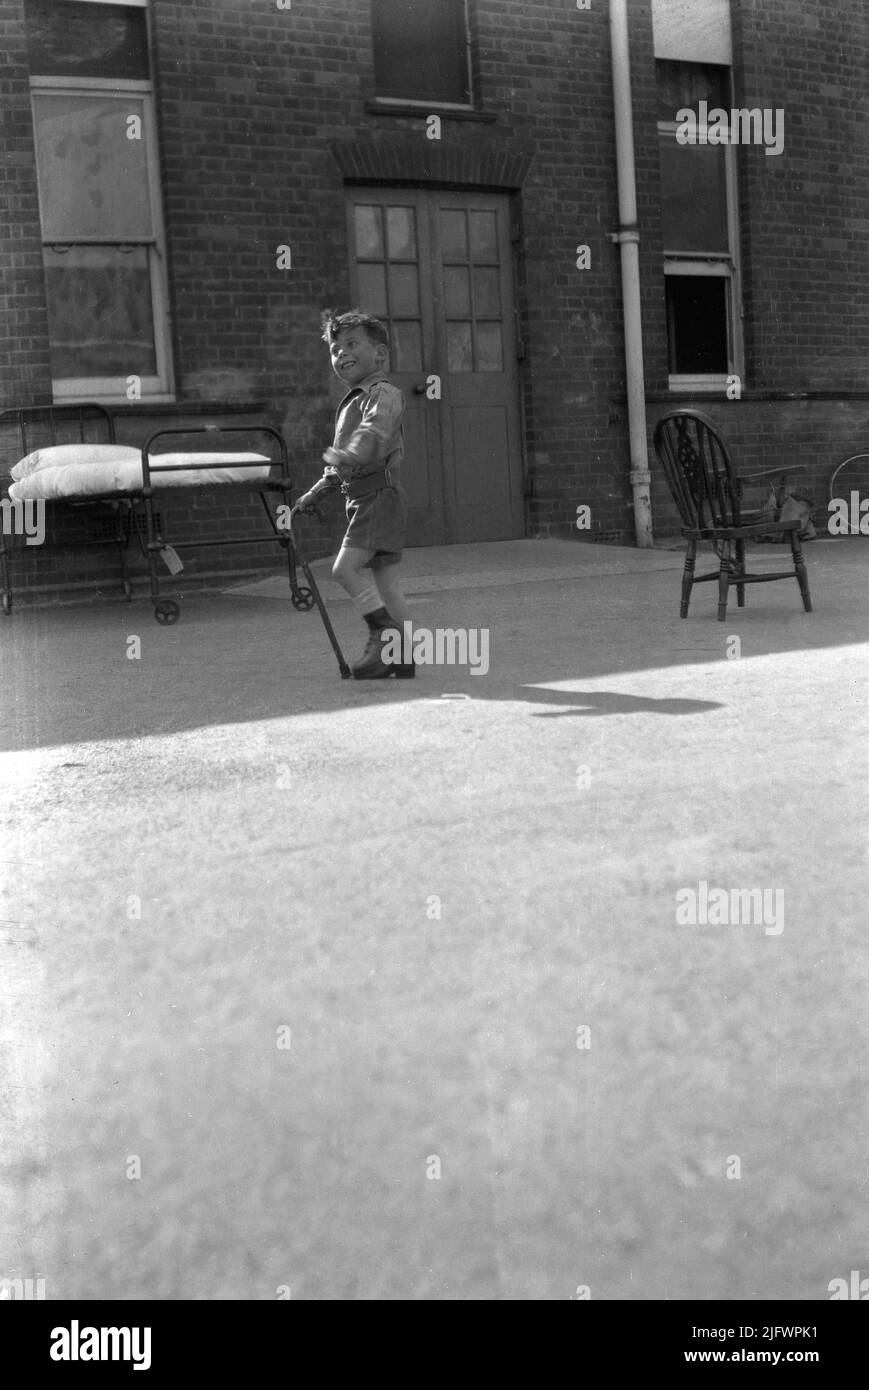 1942, historical, a little boy, a cub scout with special shoes on and holding a walking stick standing in the courty outside the wards at the Queen Mary's Hospital for Children at Carshalton, near London, England, UK. Built in 1908 as the Southern Hospital, it became a children's infirmary in 1909 and renamed after a visit by Queen Mary in 1915. It was the most heavily bombed hospital in the greater London area, with the first attack in 1940. The new threats posed by the VI and V2 rockets, saw total evacuation take place in July 1944 with children taken to other locations in England and Wales. Stock Photo